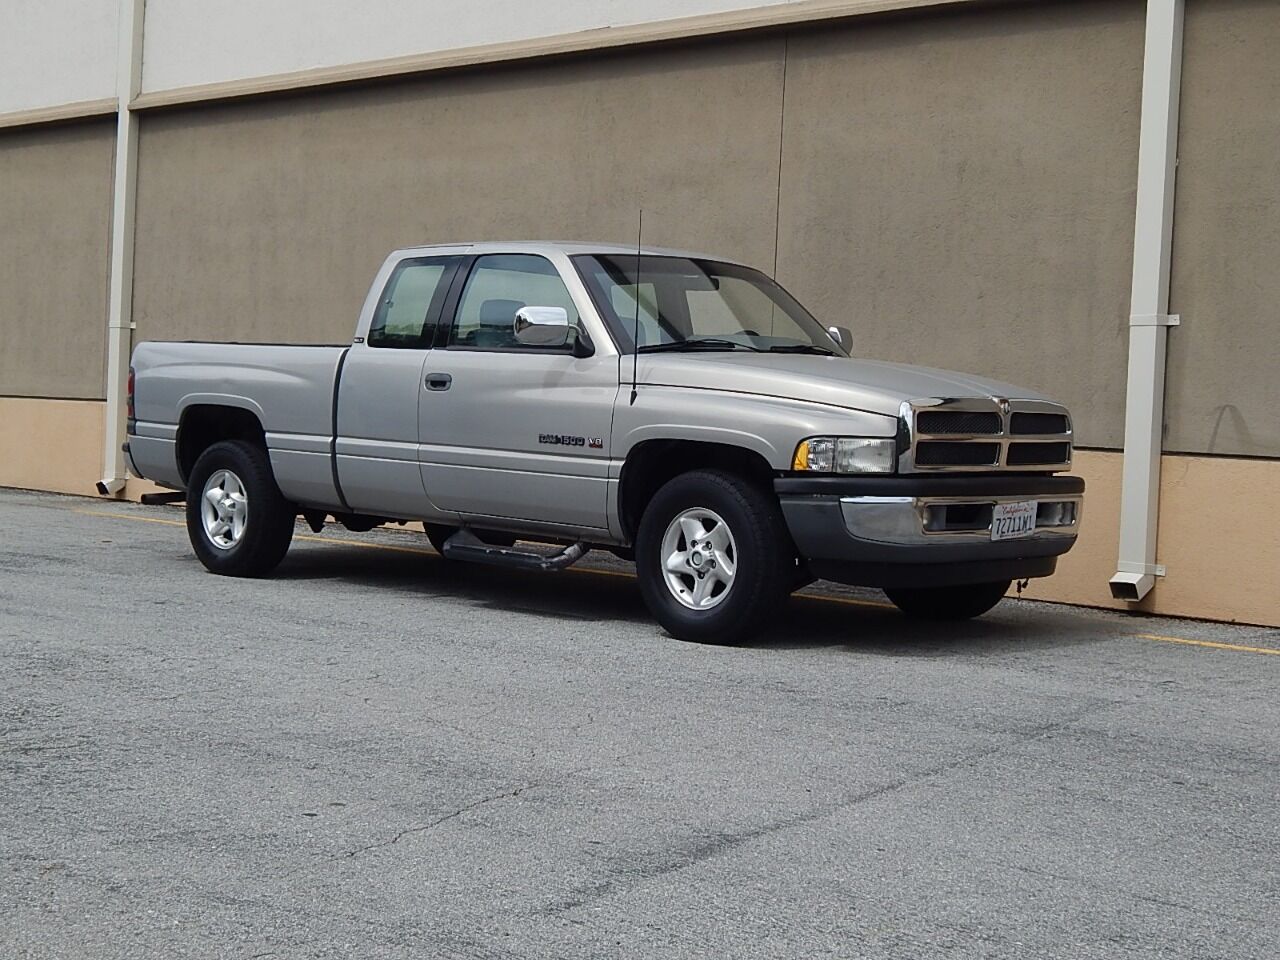 1996 Dodge Ram For Sale In Gilroy, CA - ®